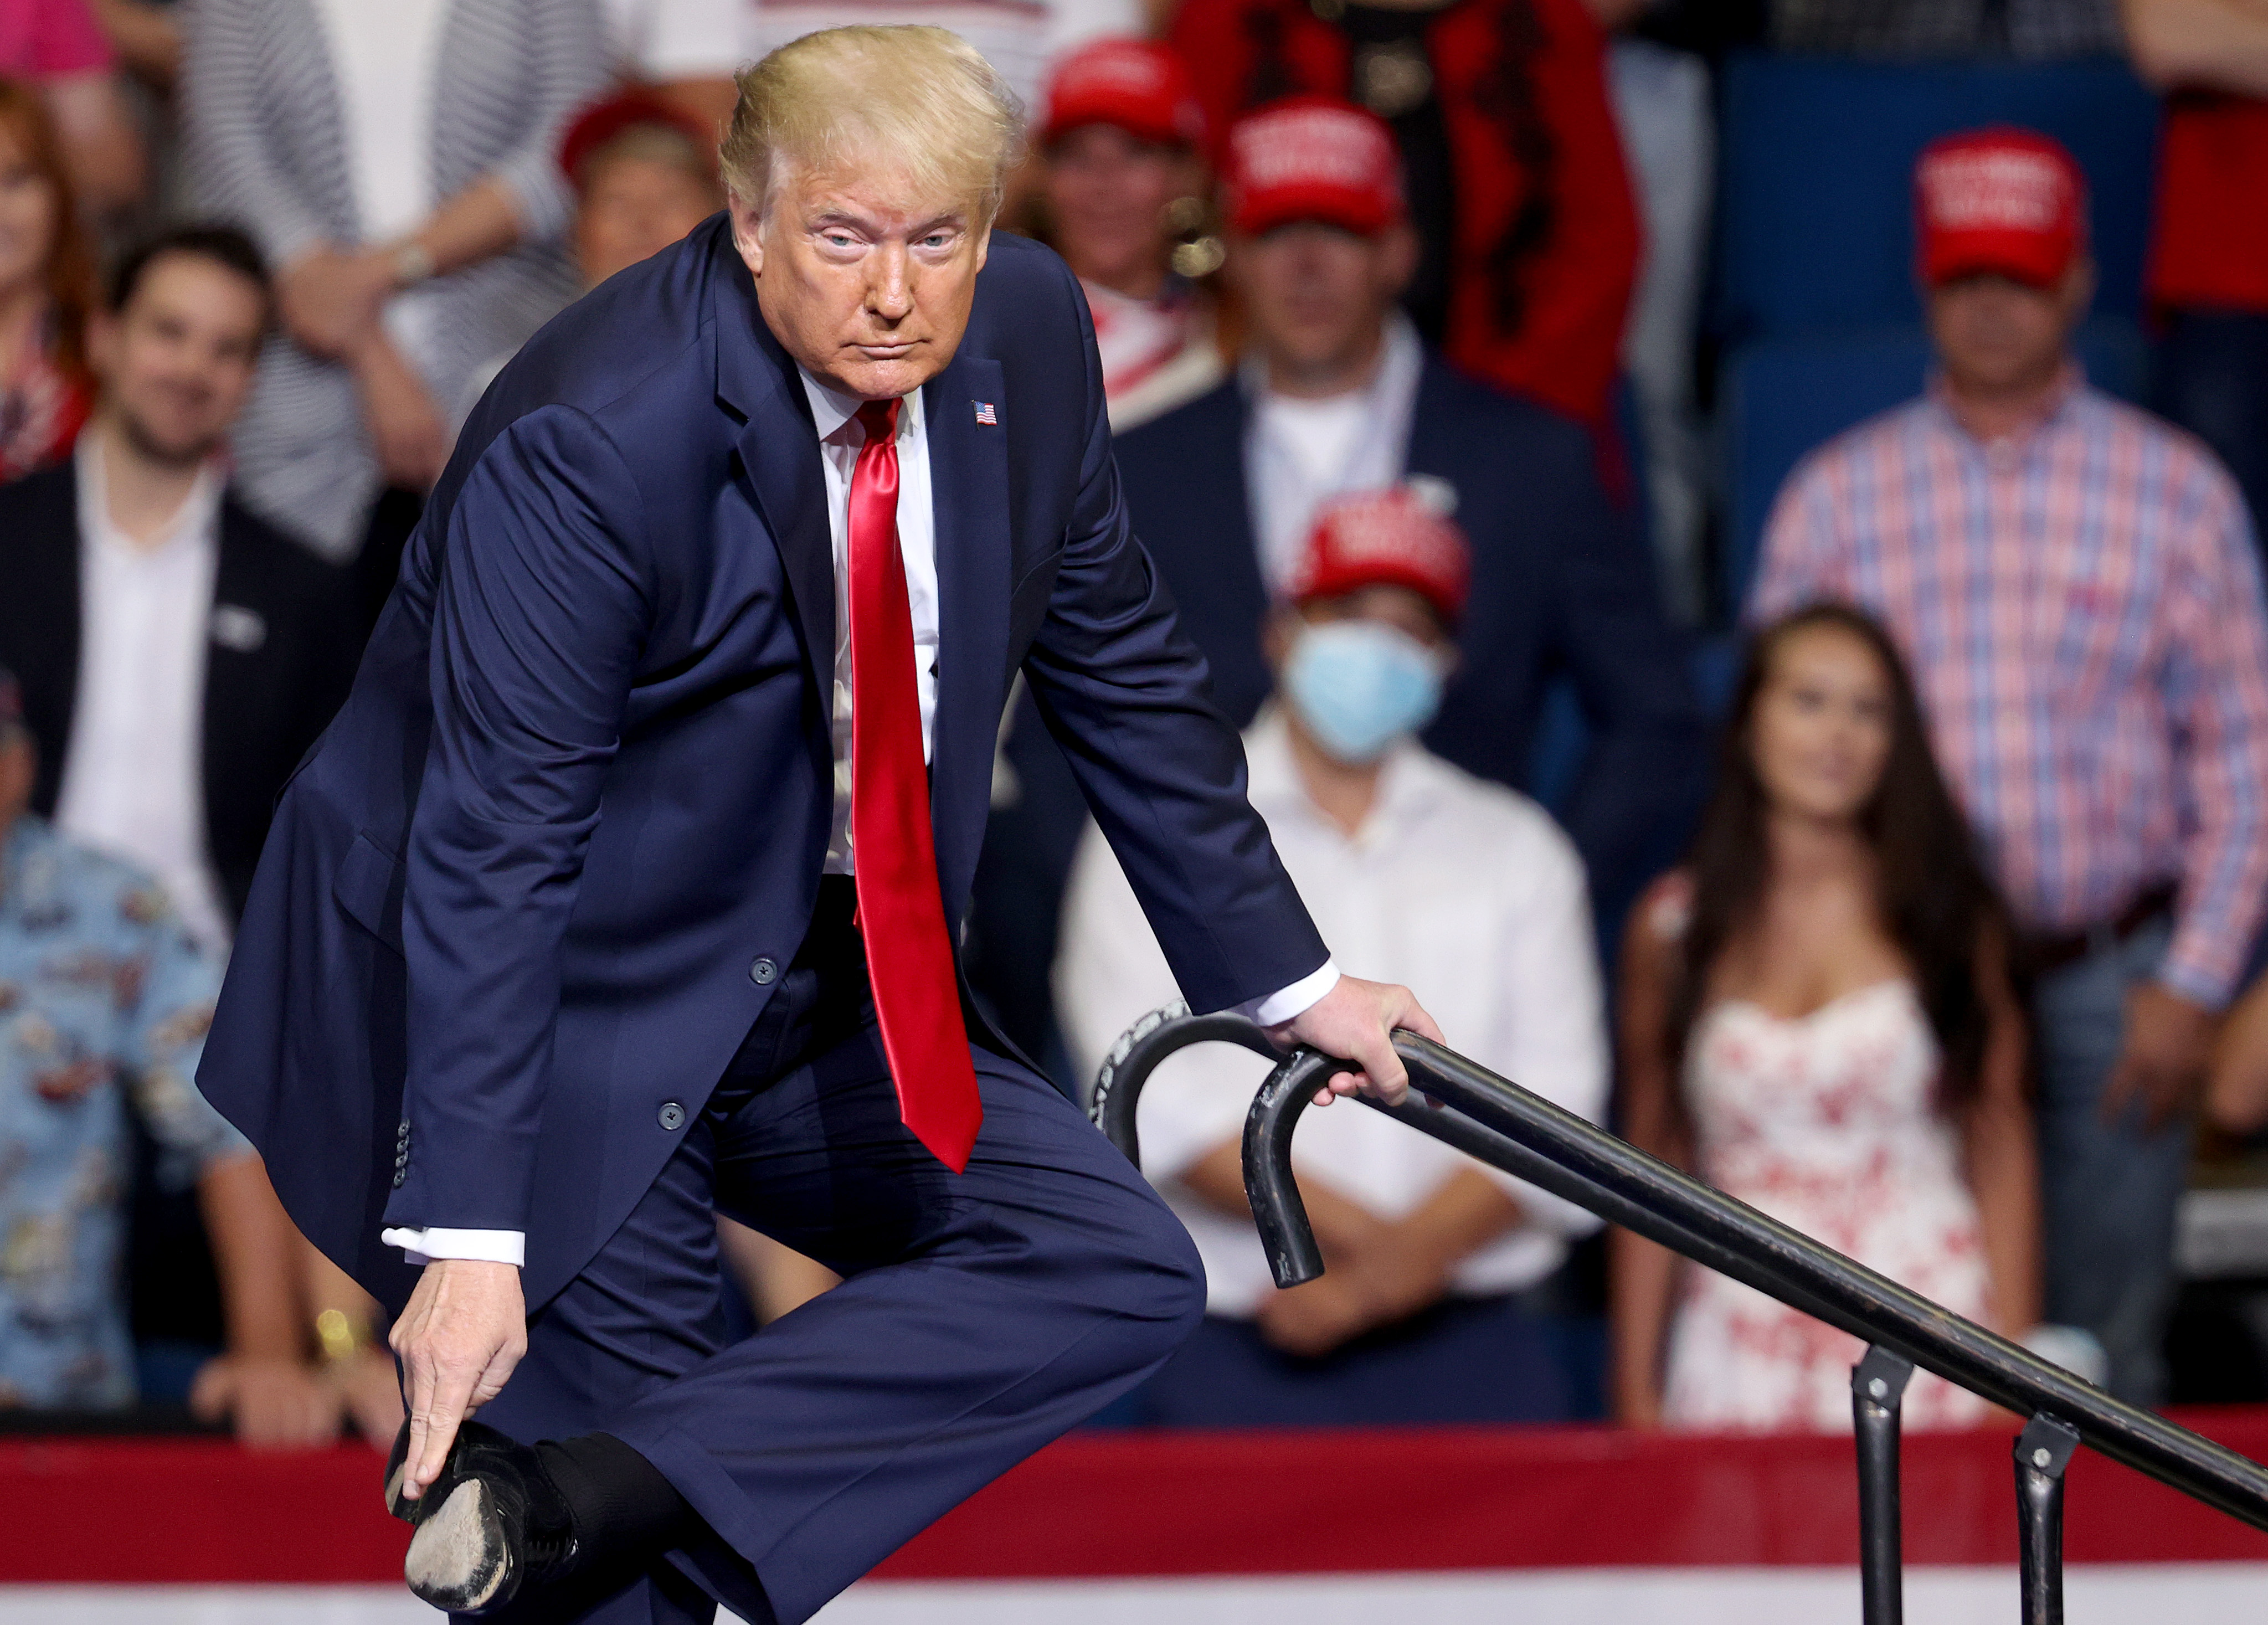 TULSA, OKLAHOMA - JUNE 20: U.S. President Donald Trump points to his shoe as he speaks at a campaign rally at the BOK Center, June 20, 2020 in Tulsa, Oklahoma. Trump is holding his first political rally since the start of the coronavirus pandemic at the BOK Center today while infection rates in the state of Oklahoma continue to rise. (Photo by Win McNamee/Getty Images)